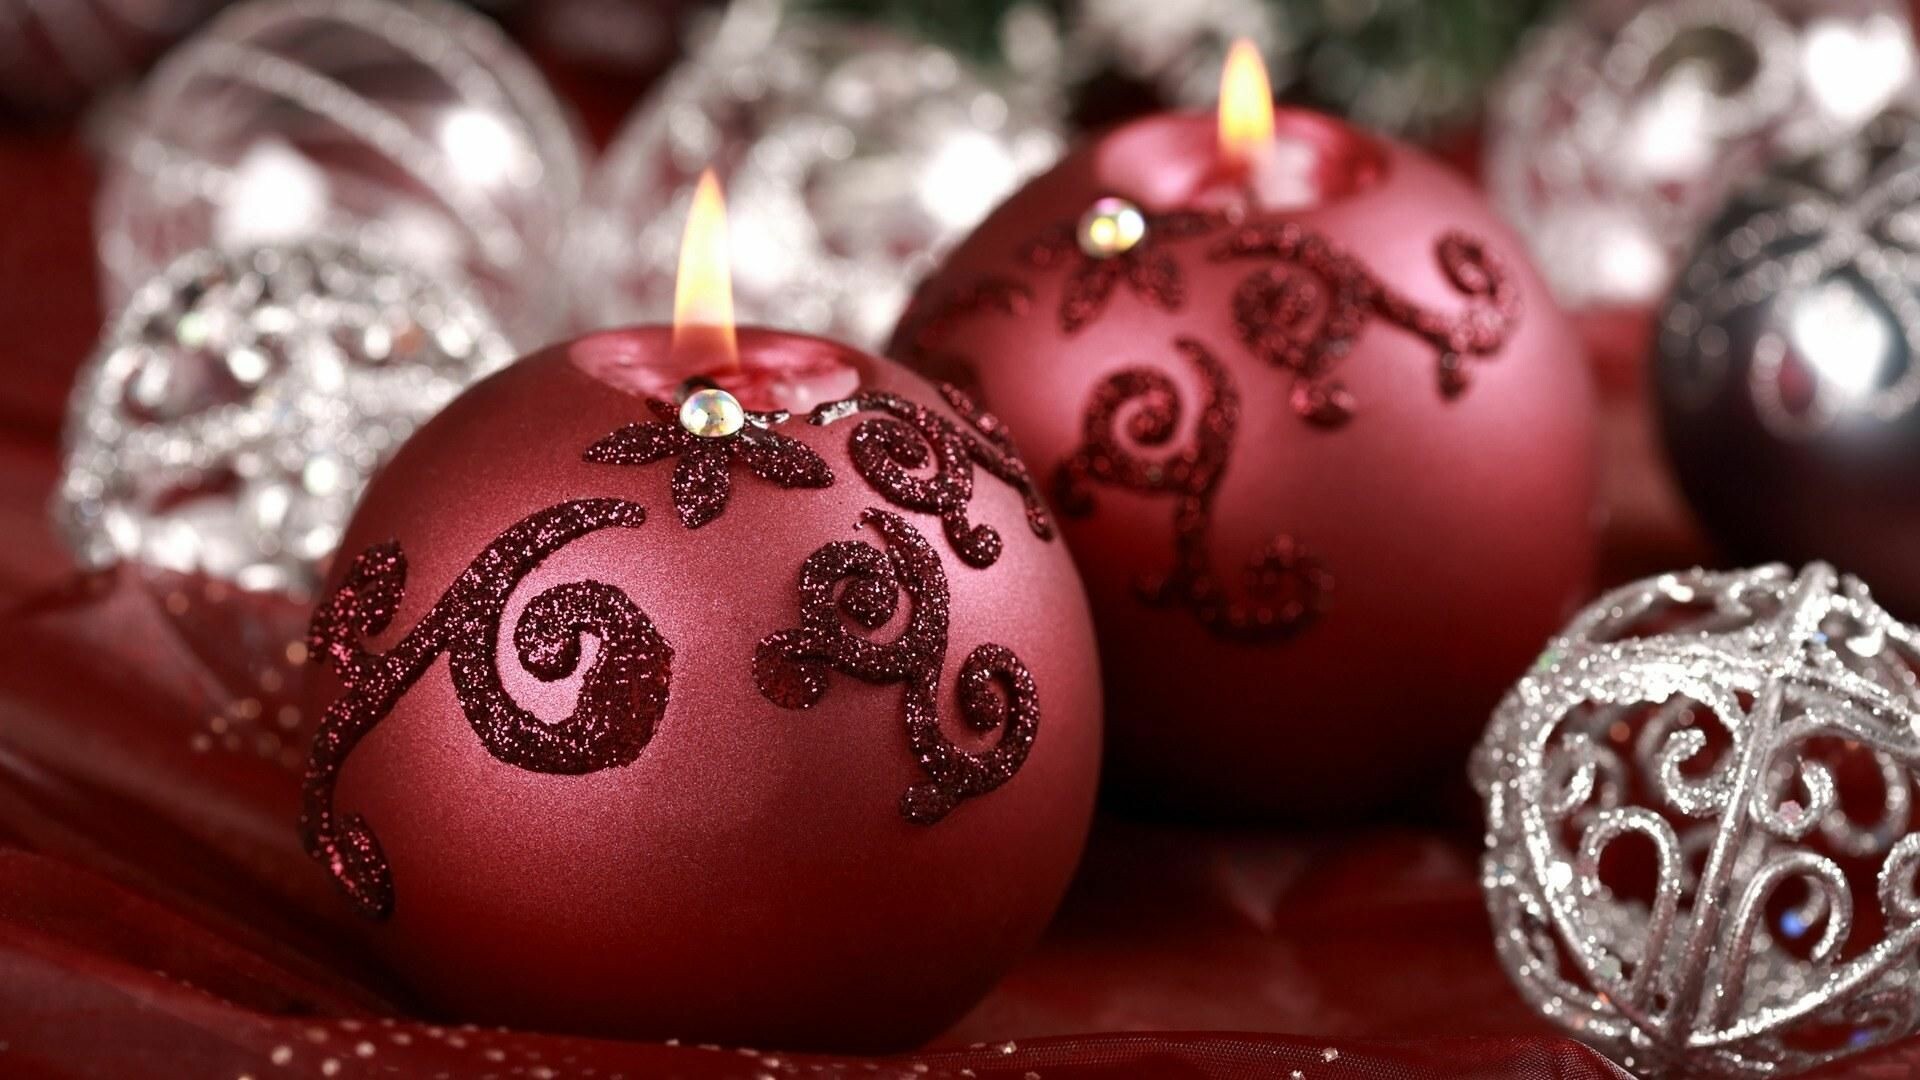 Decorations: A things used or serving to make something look more attractive. 1920x1080 Full HD Wallpaper.